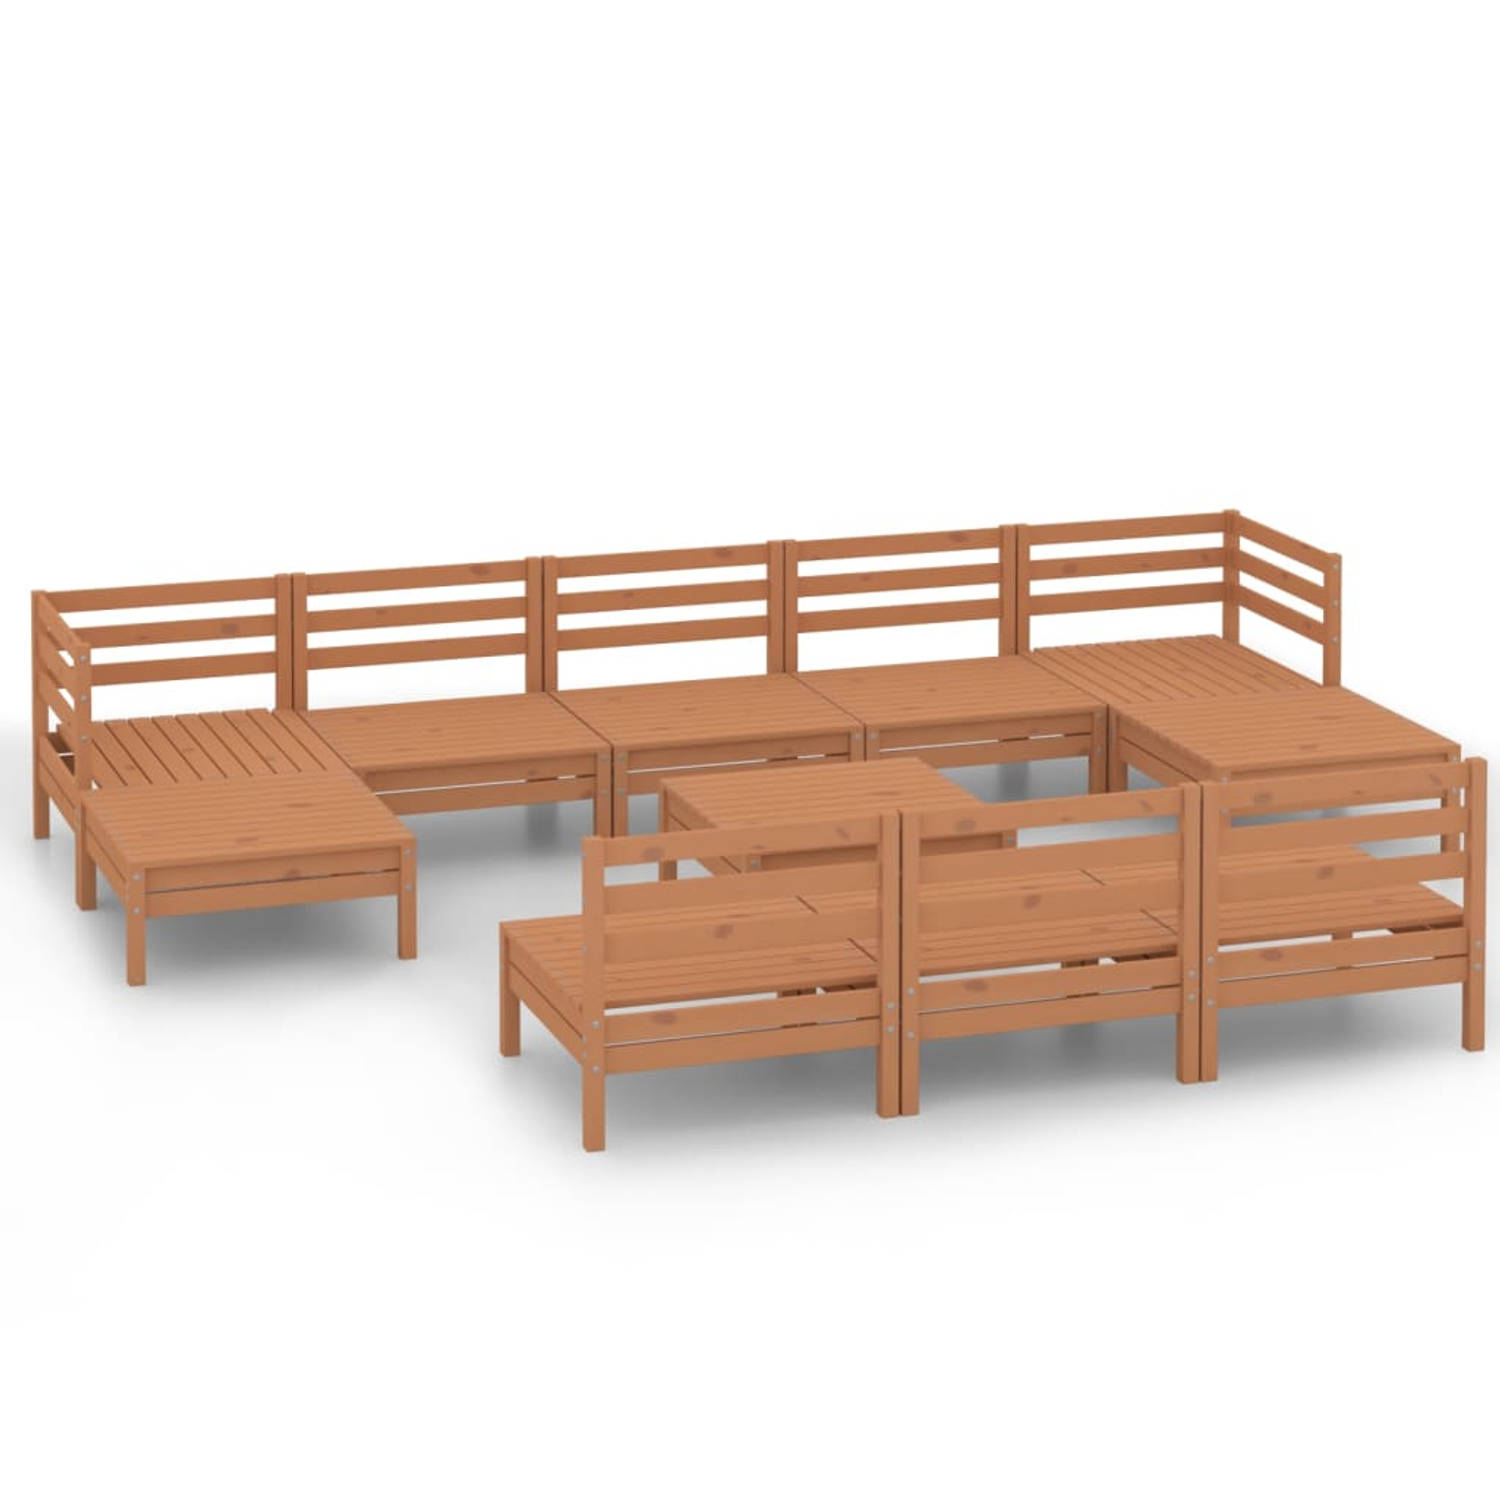 The Living Store 11-delige Loungeset massief grenenhout honingbruin - Tuinset